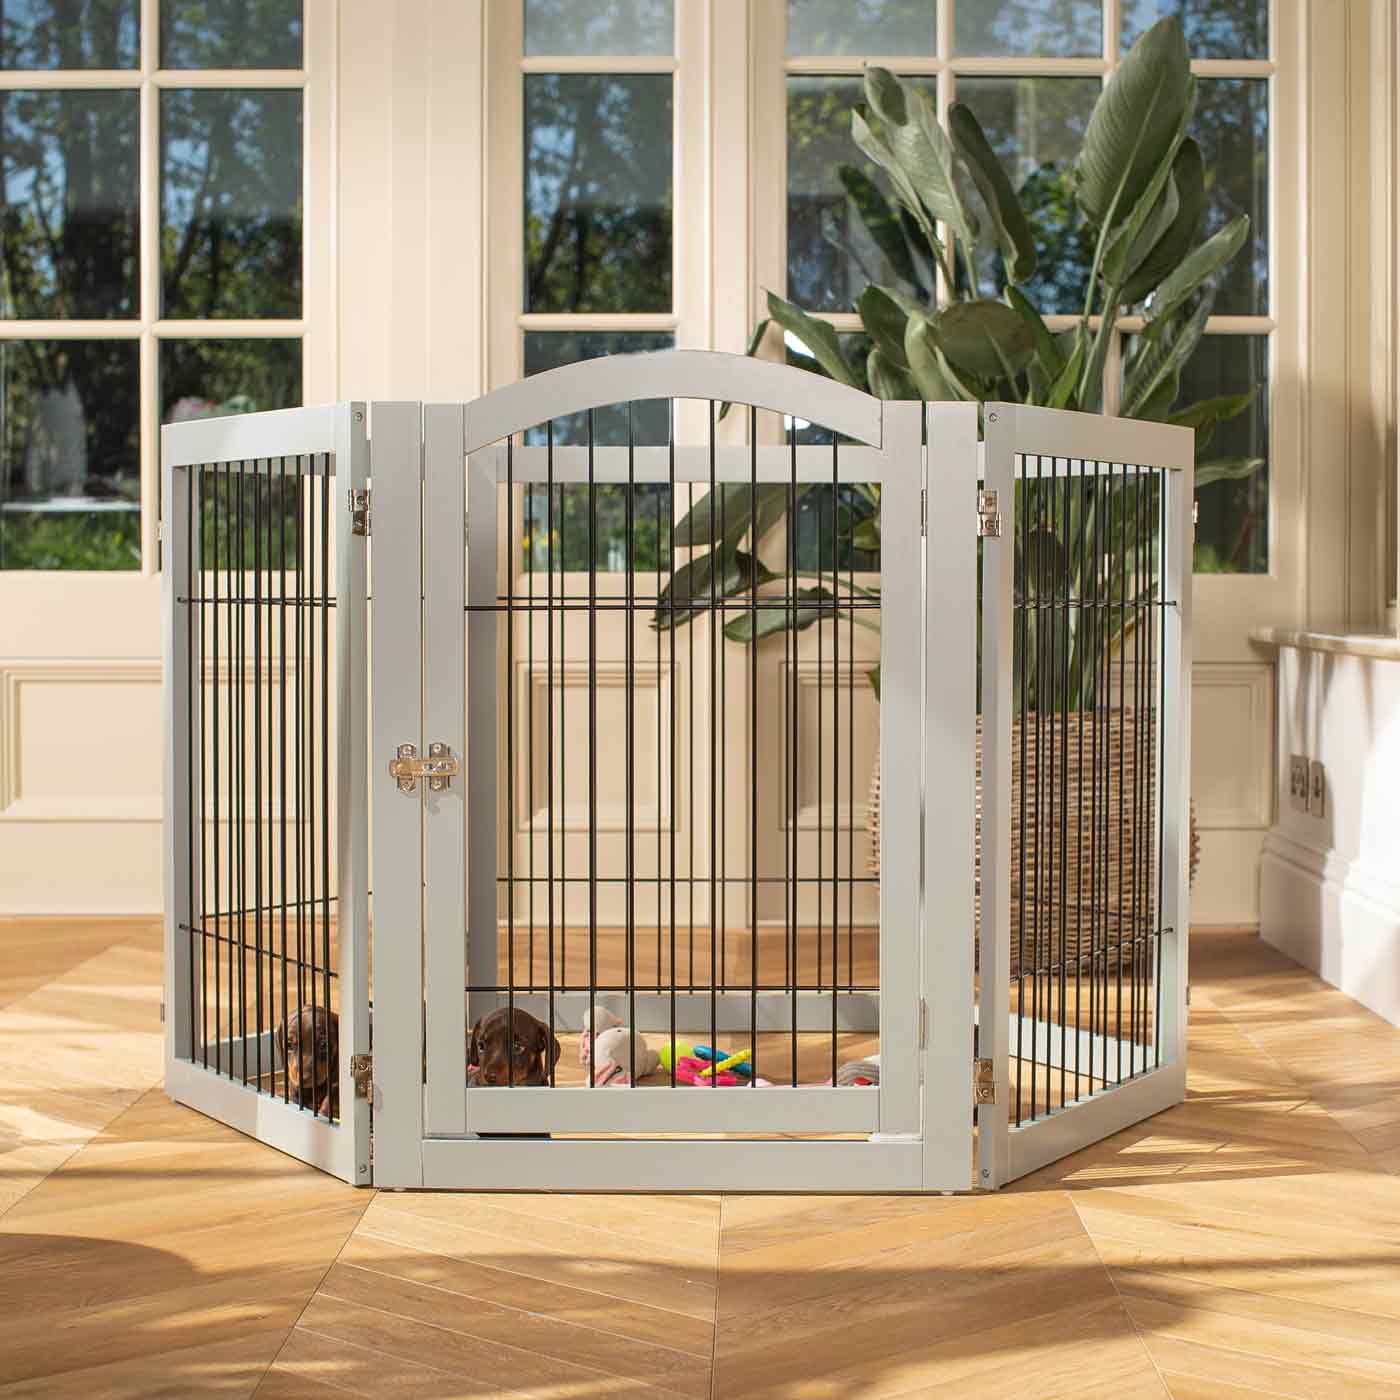 Ensure The Ultimate Puppy Safety with Our Heavy Duty Wooden Puppy Play Pen, Crafted to Take Your Pet Right Through Maturity! Powder Coated to Be Extra Hardwearing! 6 panels that are 80.5cm high! Available To Now at Lords & Labradors US